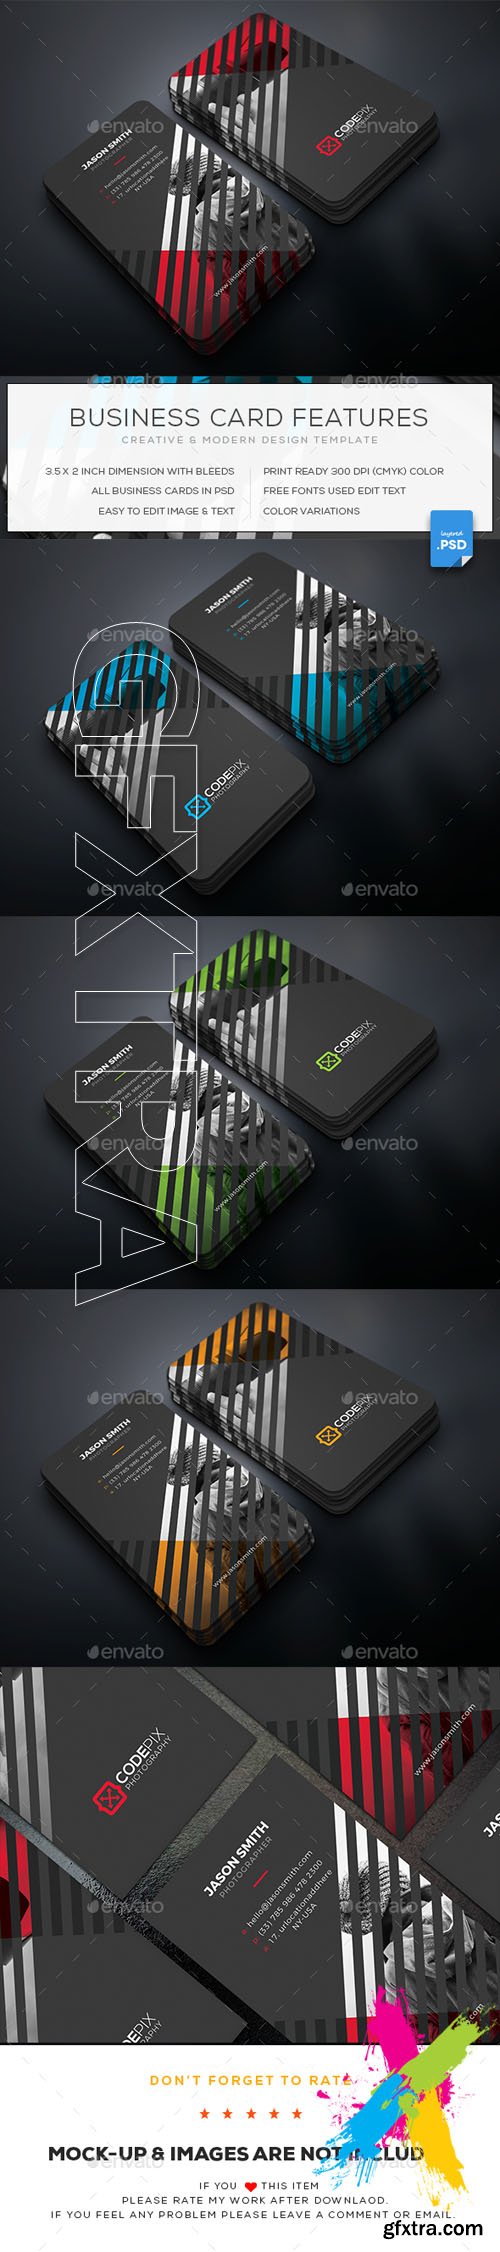 Graphicriver - Photography Business Card 20217576